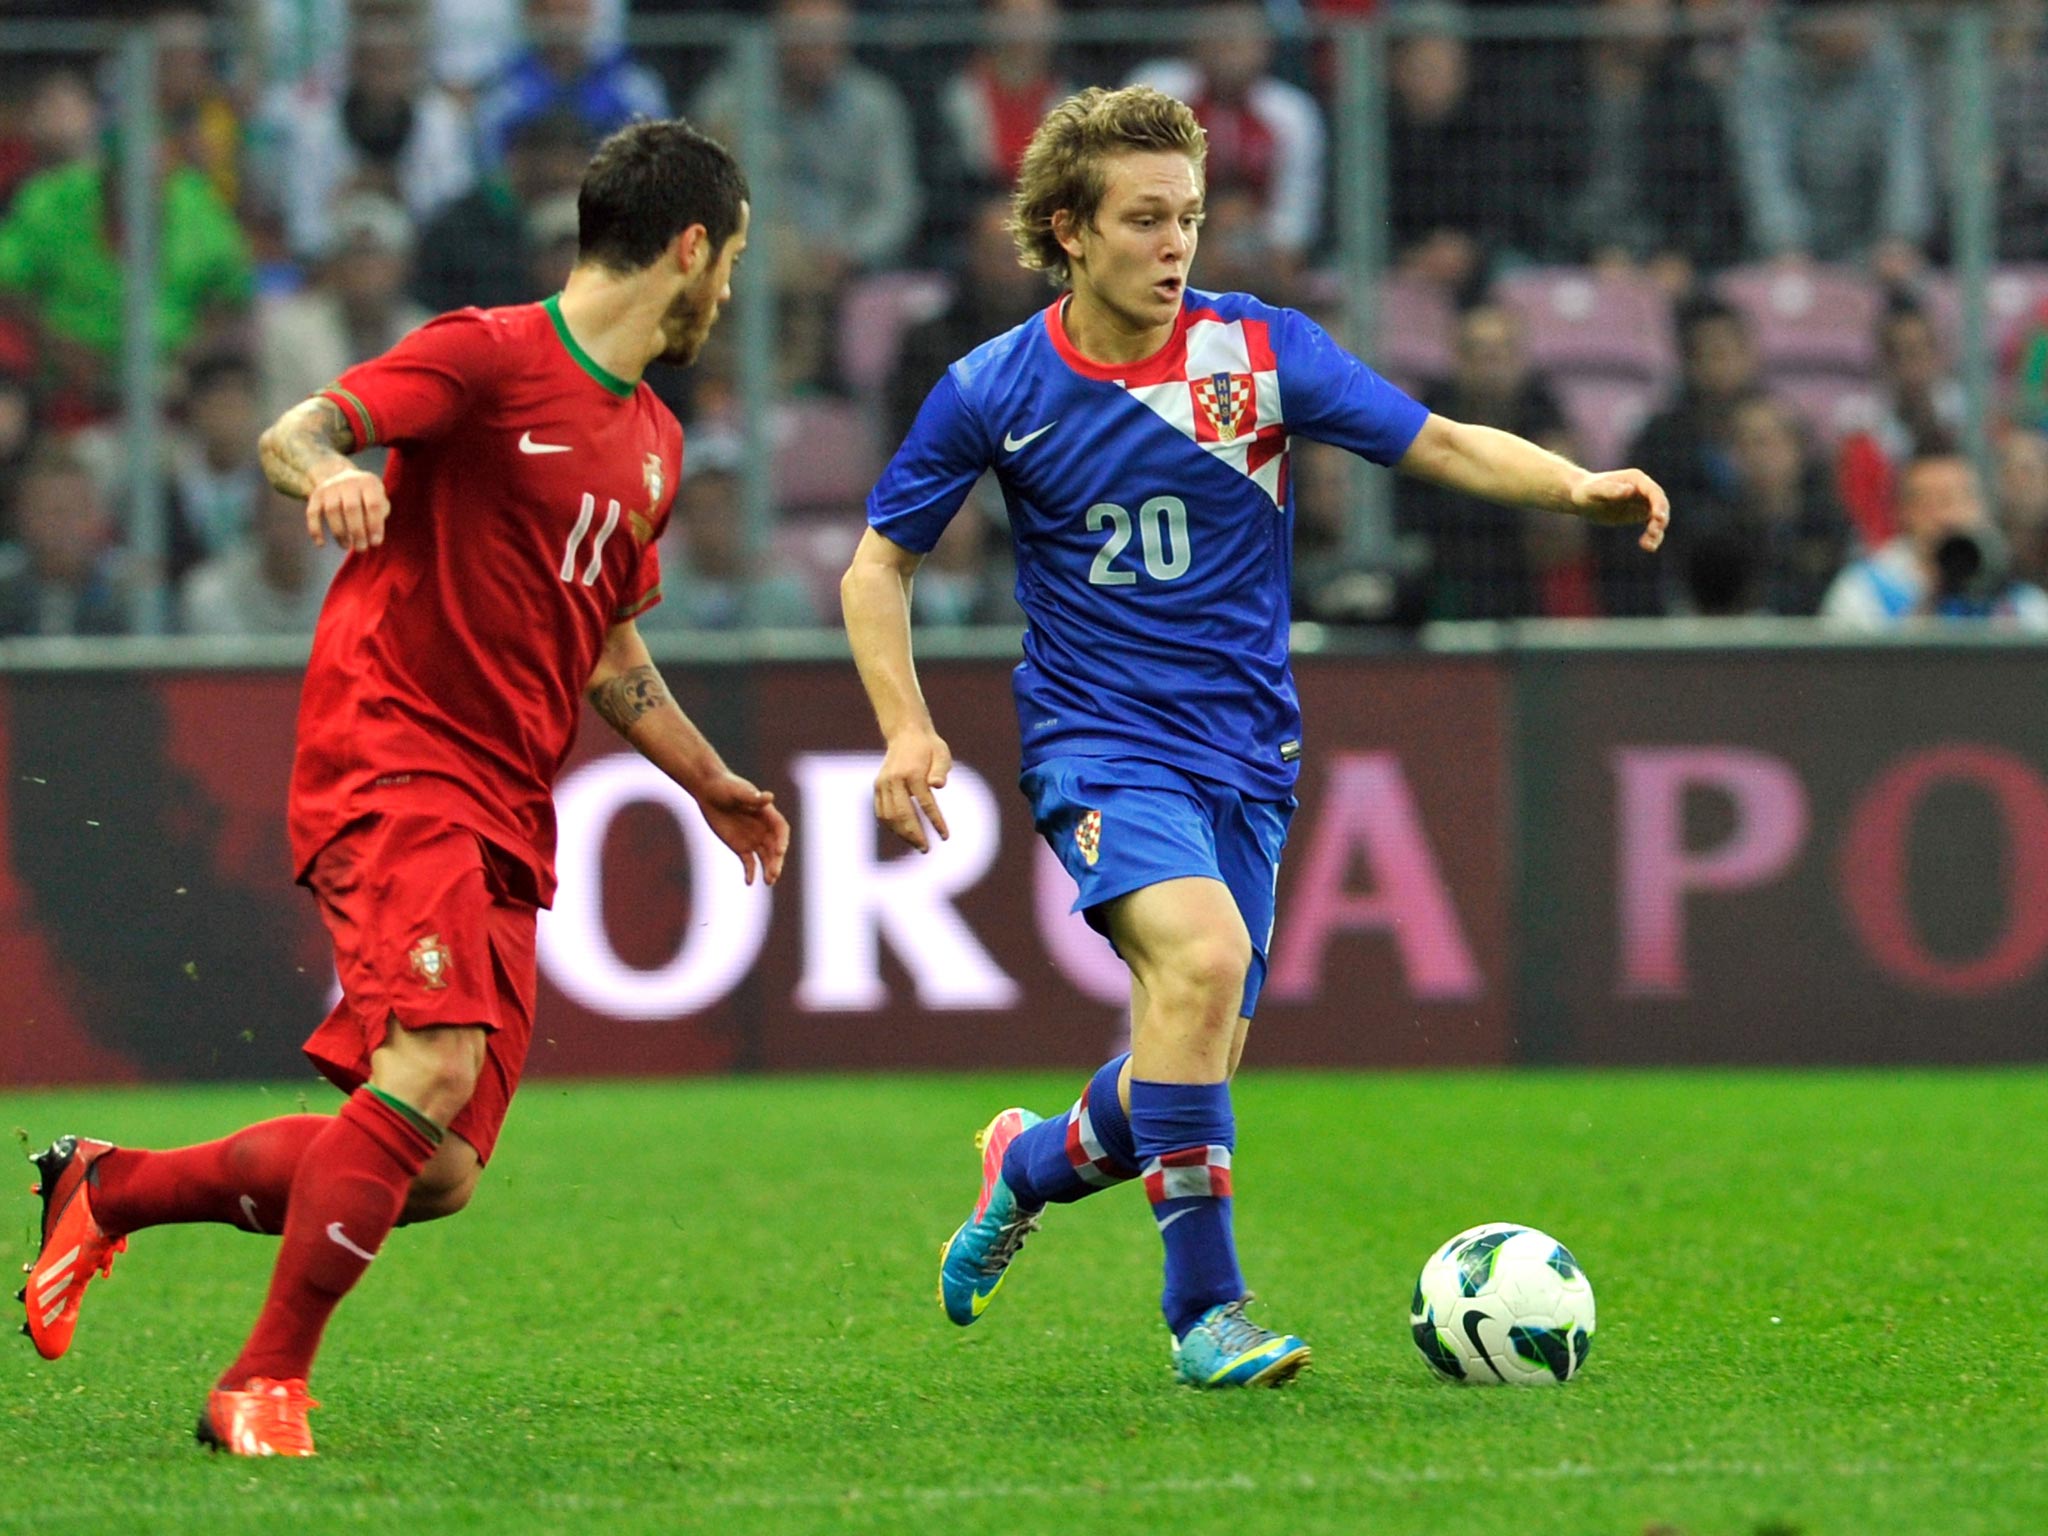 Alen Halilovic (right) has agreed to join Barcelona from Dinamo Zagreb in the summer